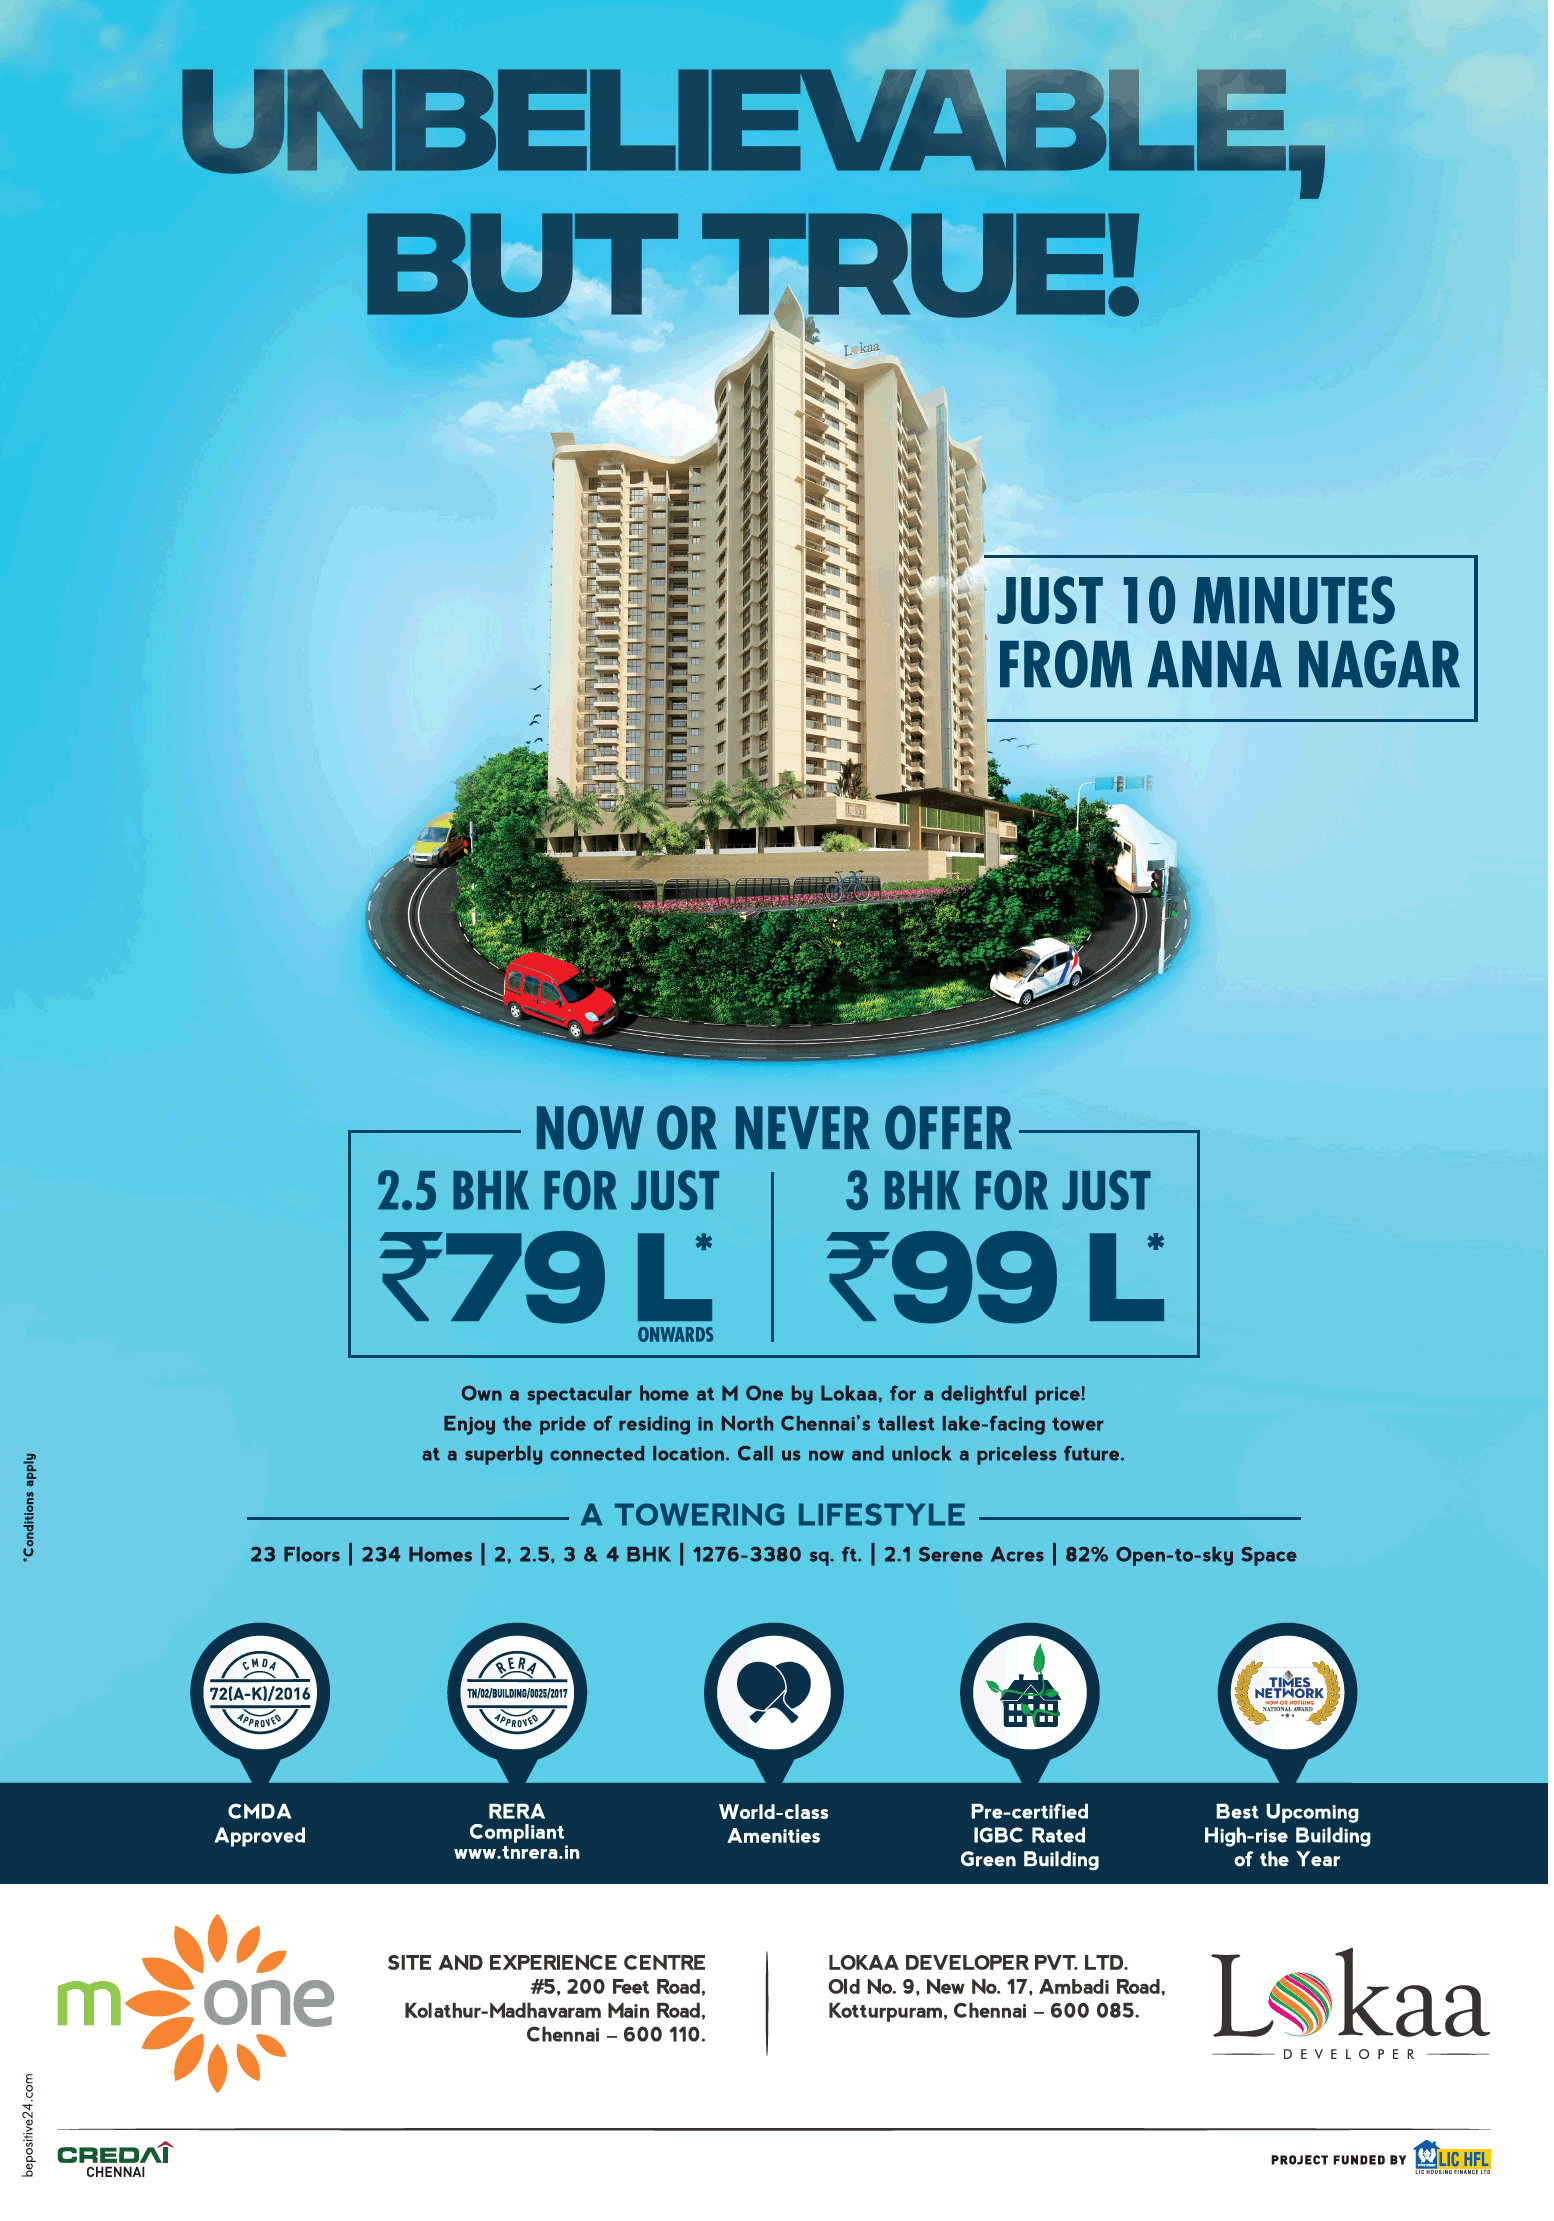 Now or never offer 2.5 BHK for just Rs 79 Lakh at Lokaa M One, Chennai Update